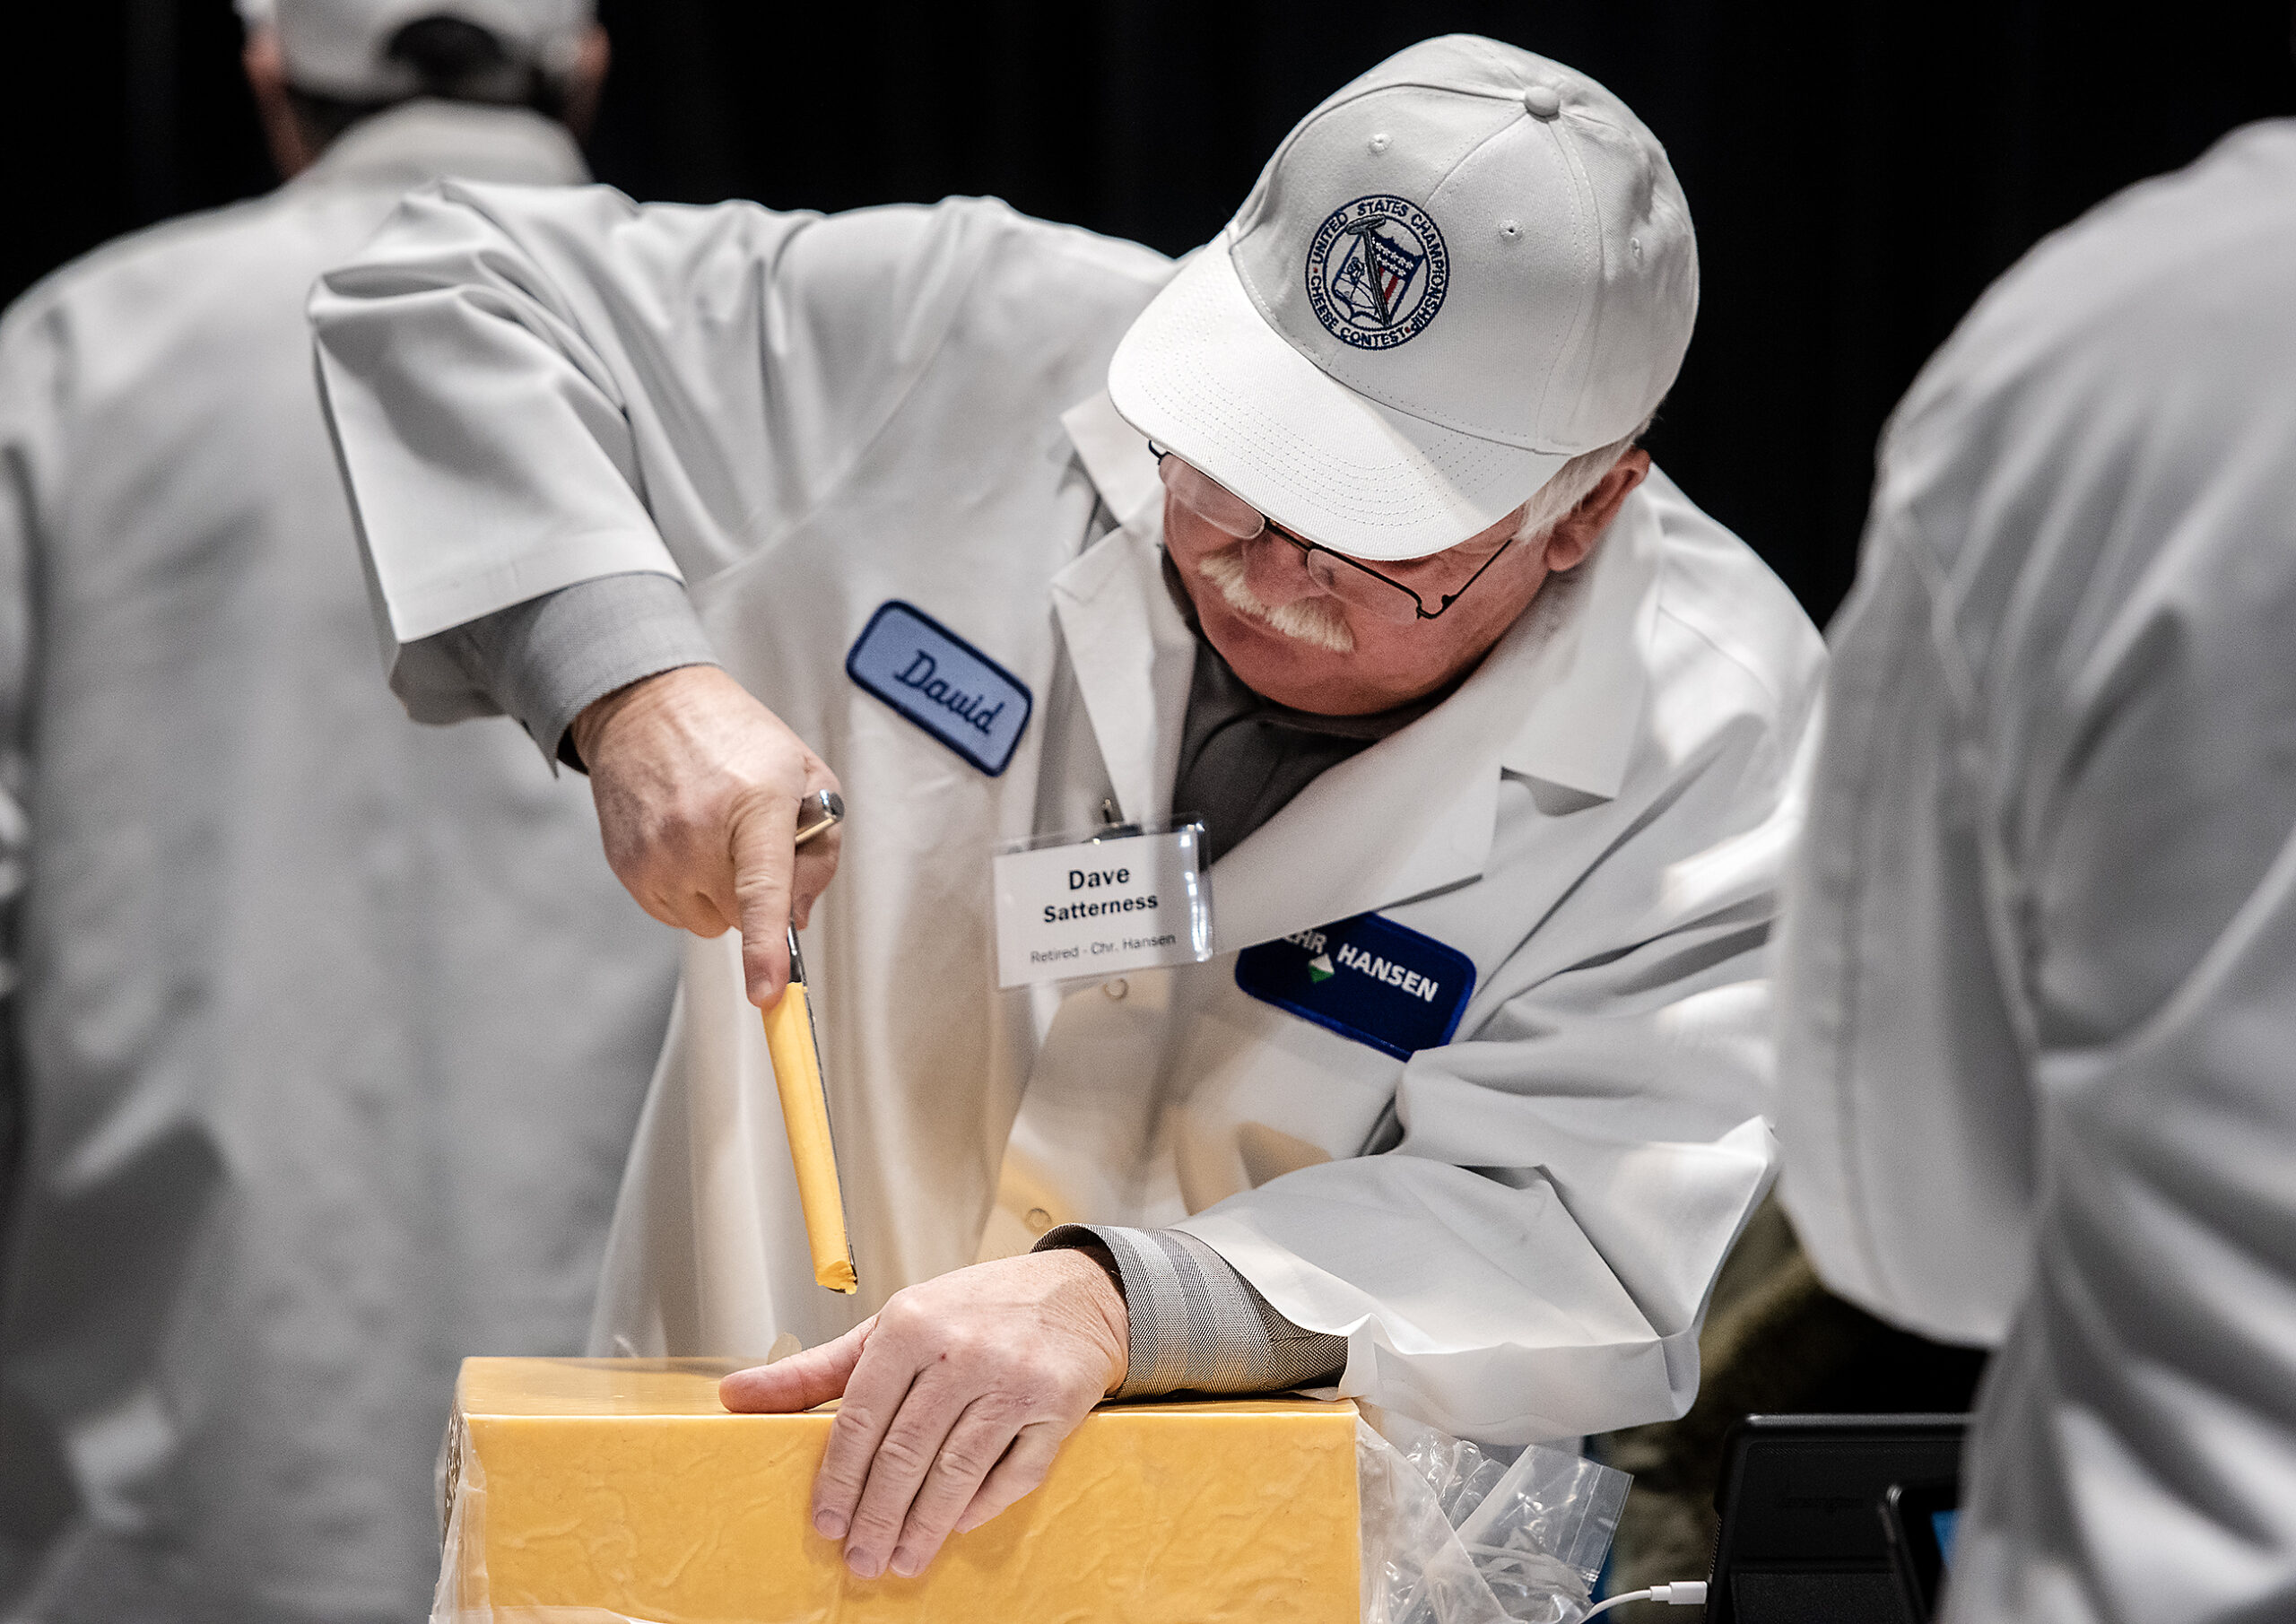 A gouda time: Green Bay hosts US Championship Cheese Contest